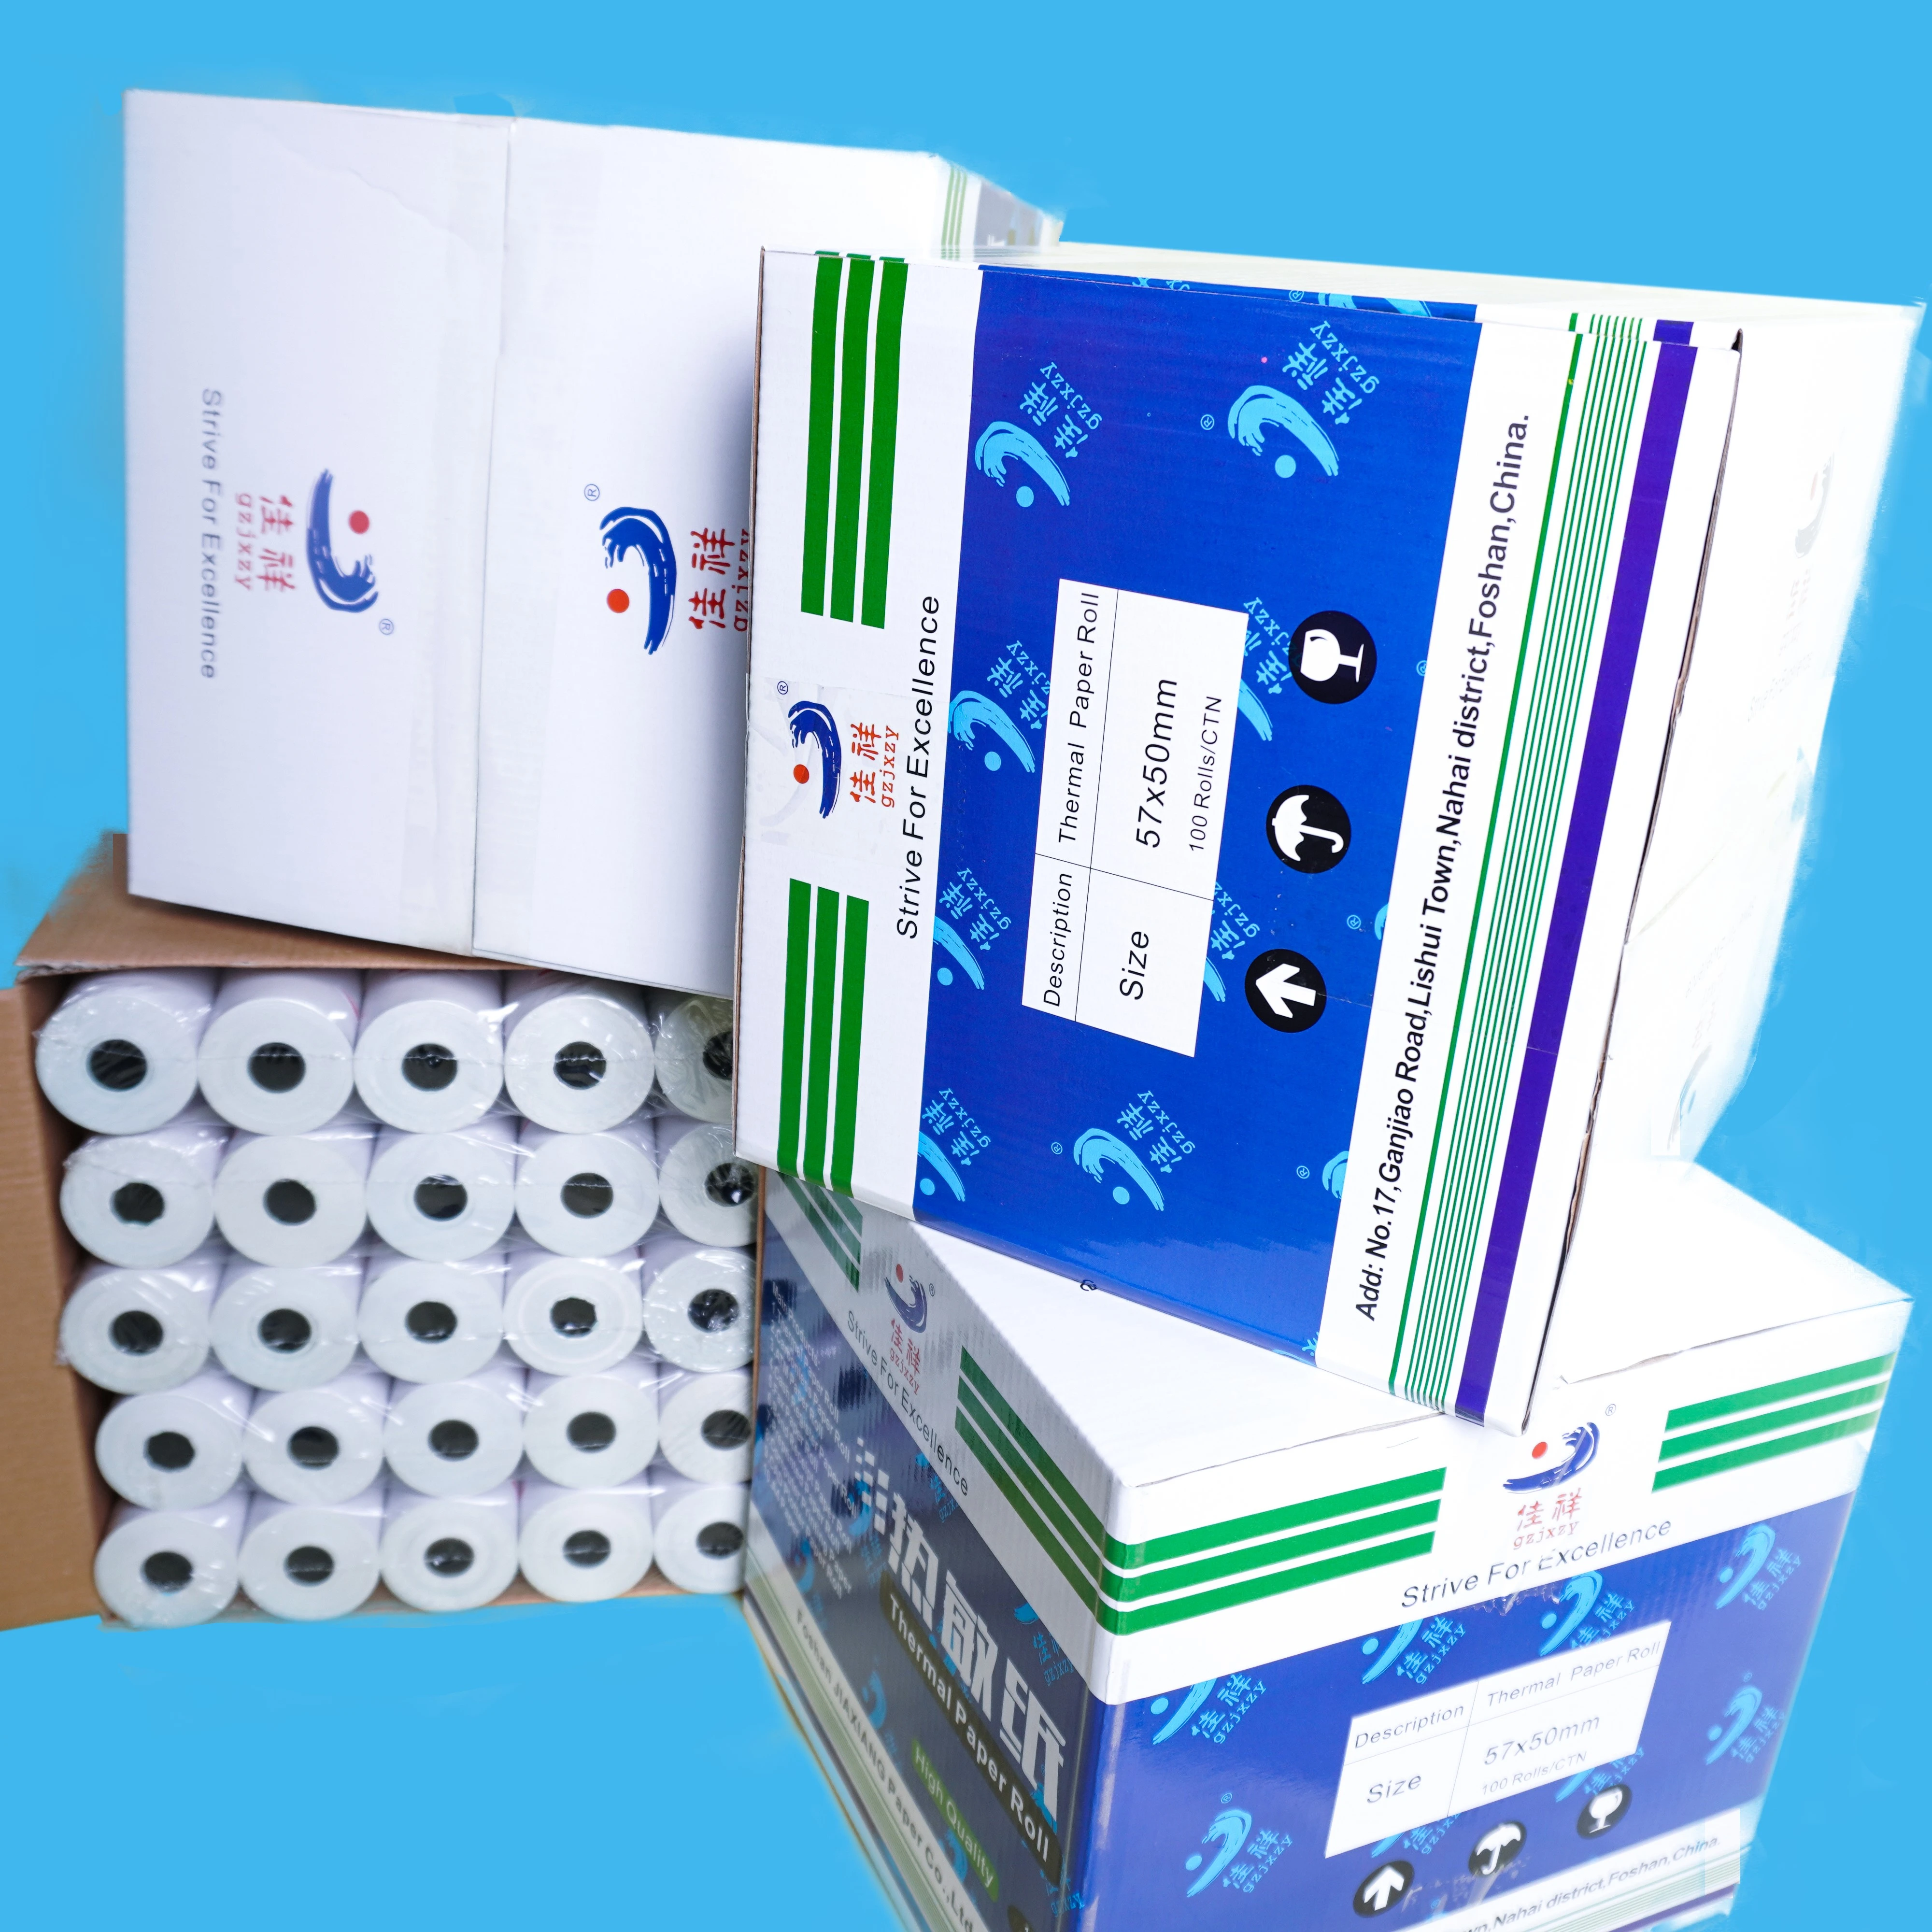 Pos Thermal Paper Roll Sale Black White Tia Oem Hot Printing Package Origin Image Type Quality